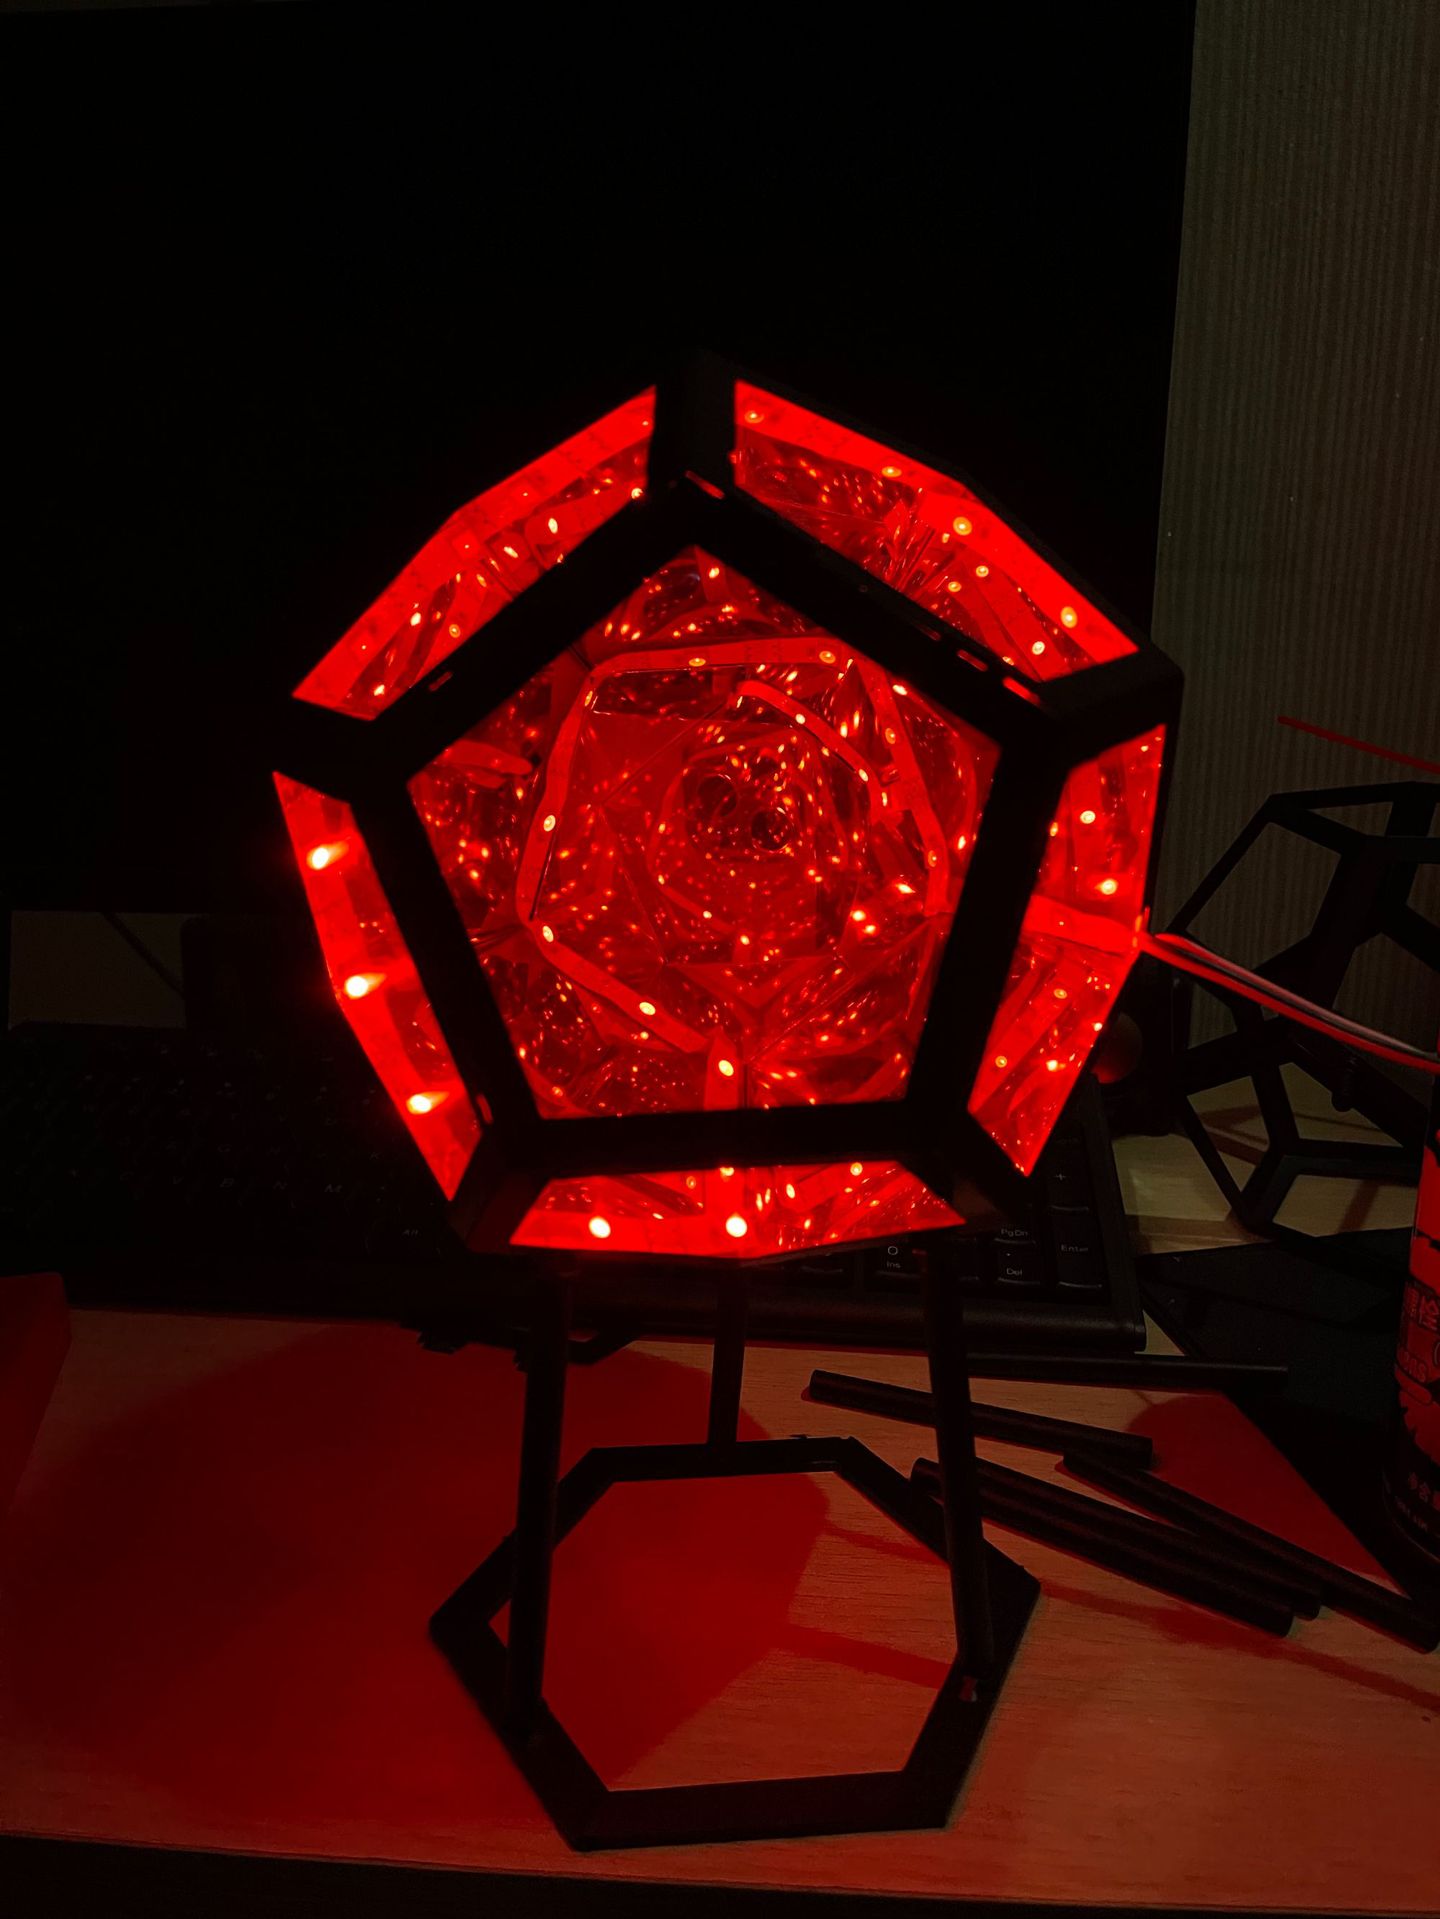 LED-Night-Light-Infinite-Dodecahedron-Color-Art-Light-Decor-Novelty-Christmas-Gift-Cool-Technology-D-1892830-3